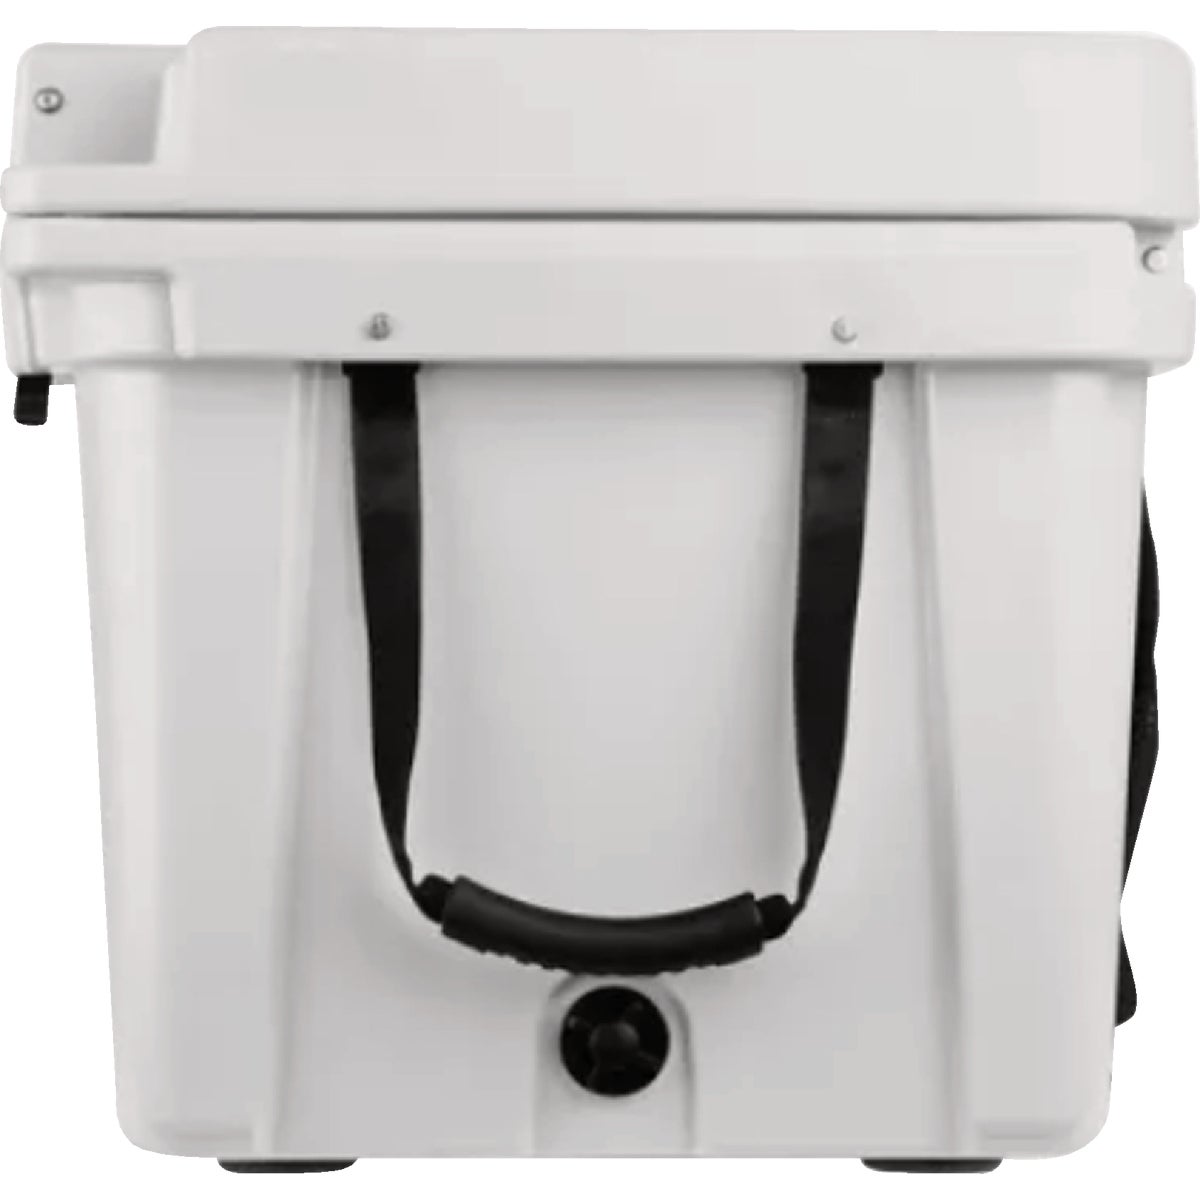 ORCA ORCW080 Orca 80 Qt. Cooler, White ORCW080